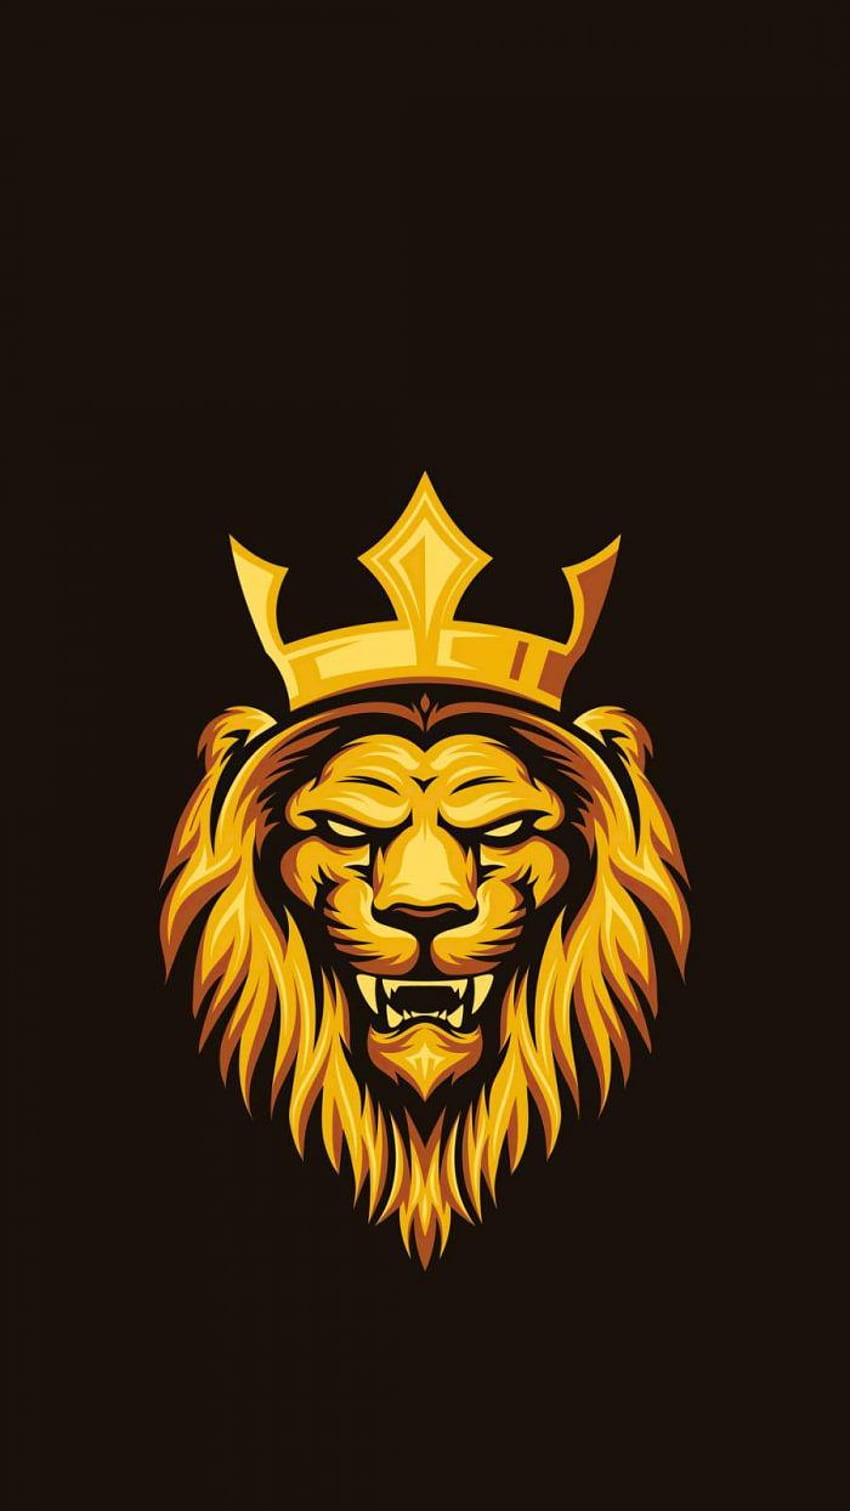 Luxury lion king logo template Royalty Free Vector Image